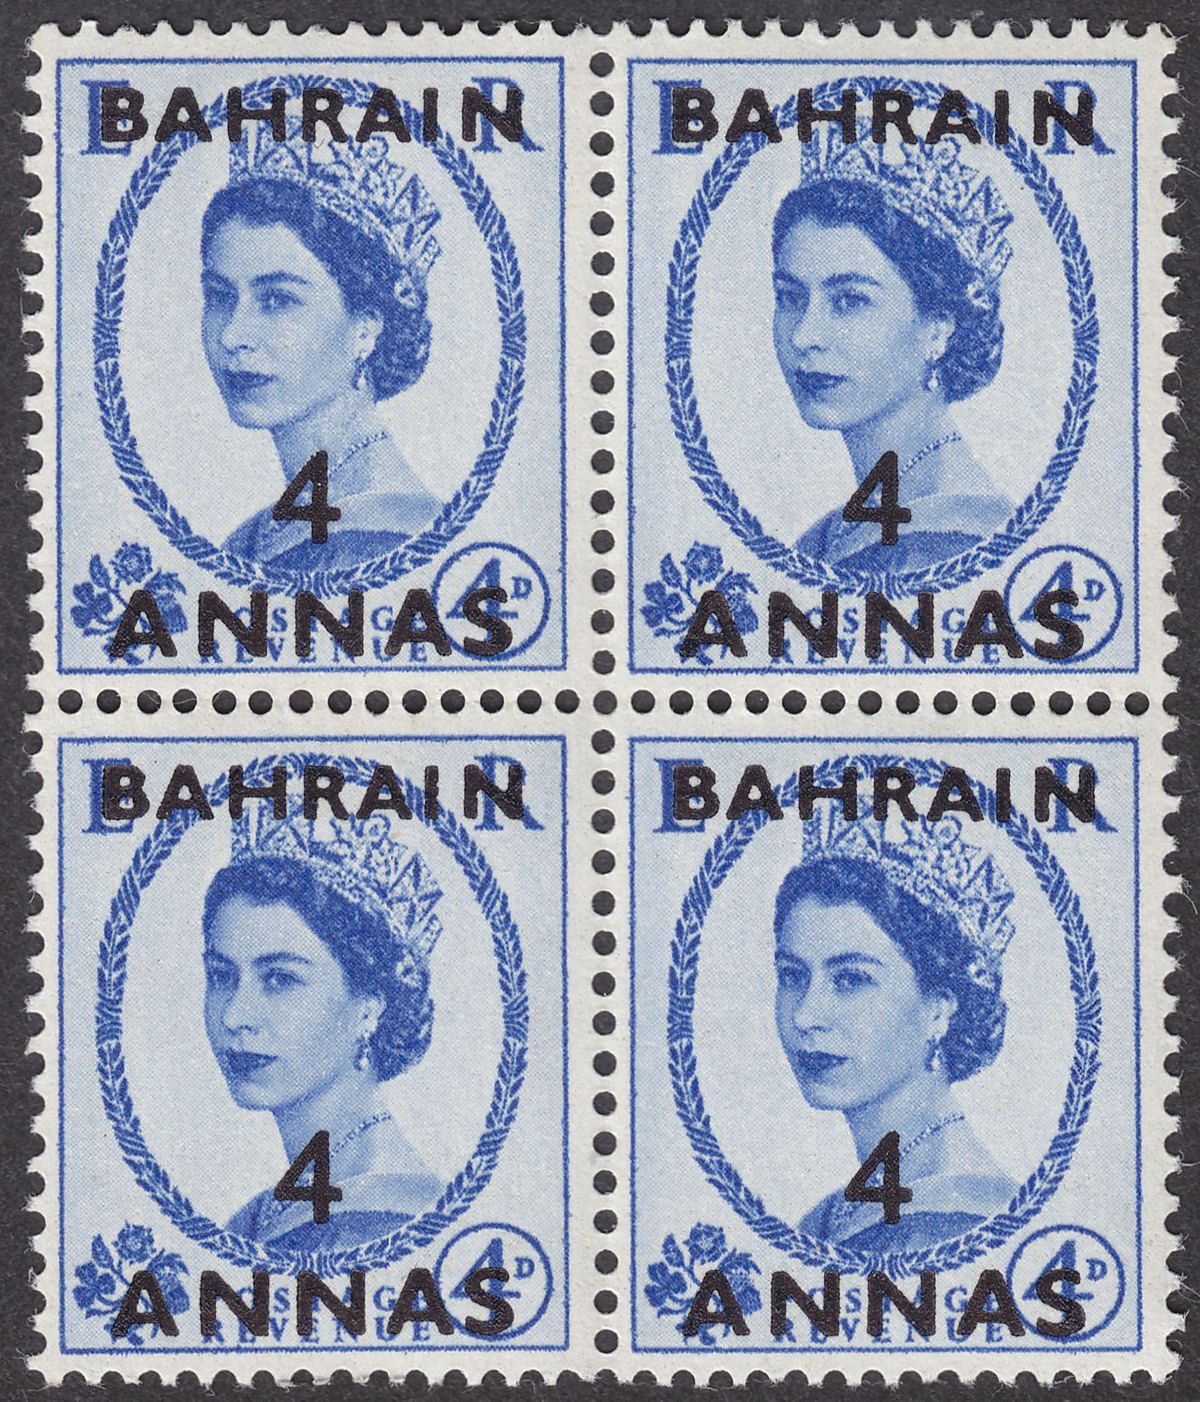 Bahrain 1956 QEII 4a Surcharge on 4d Block of 4 w Retouch to Neck Variety Mint